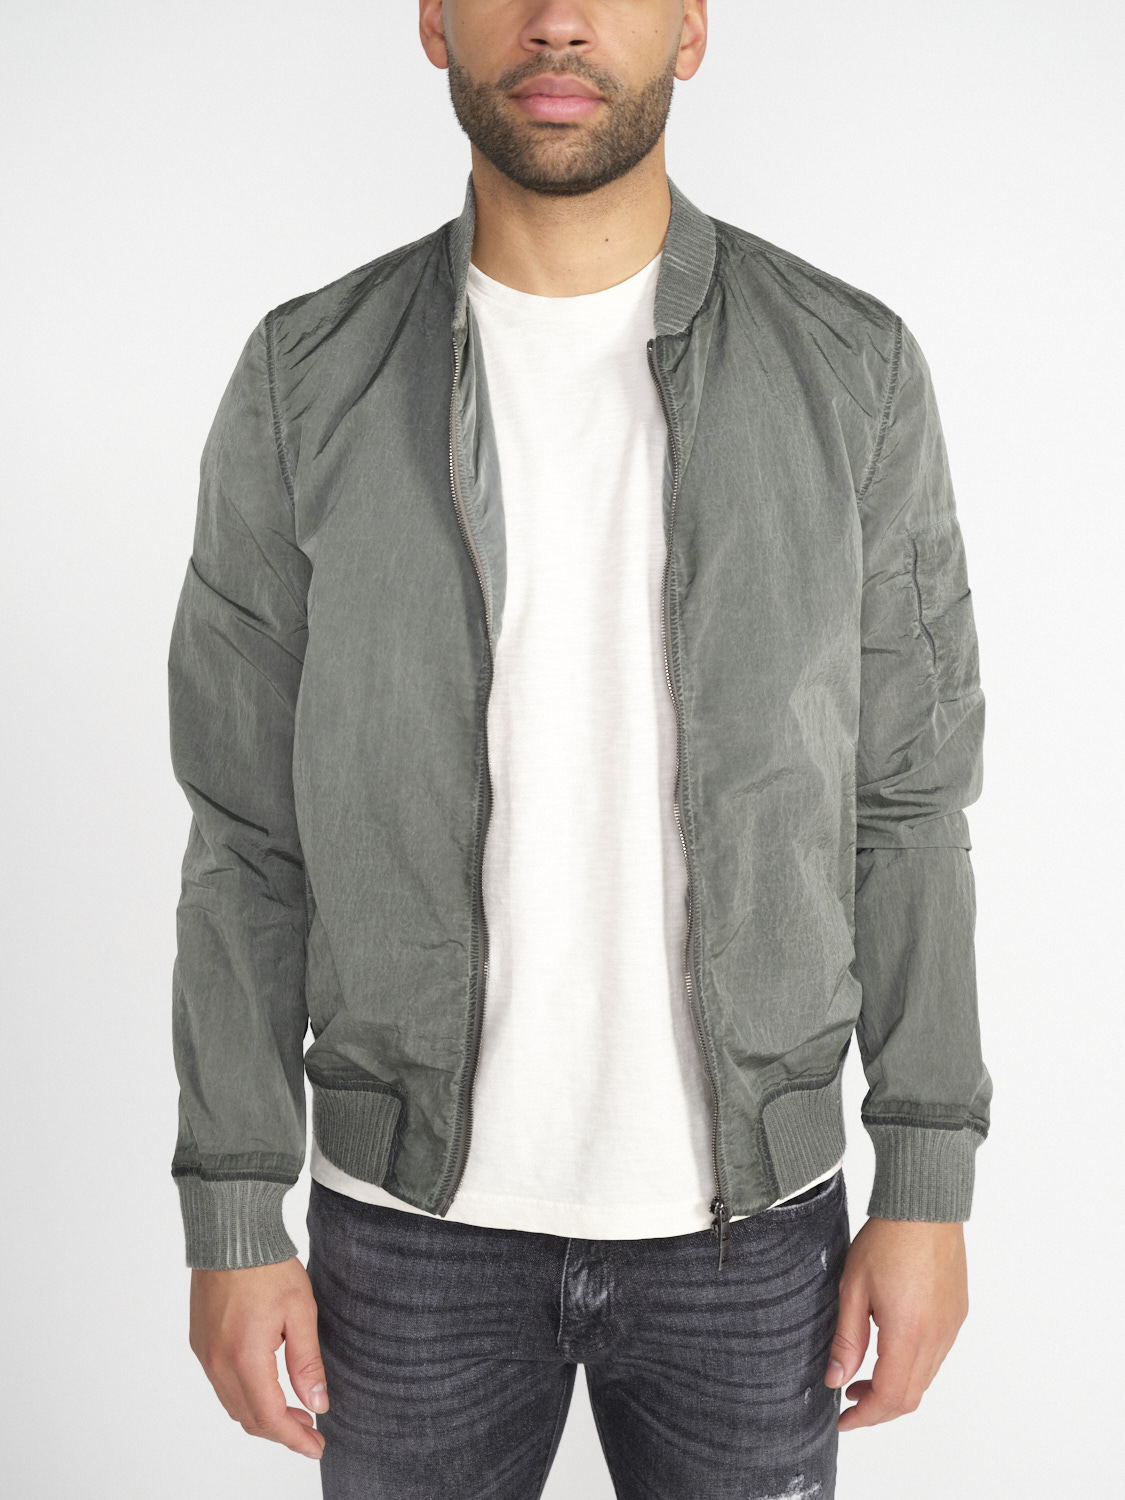 GMS 75 Lightweight bomber jacket made of technical fabric with a used look  khaki L